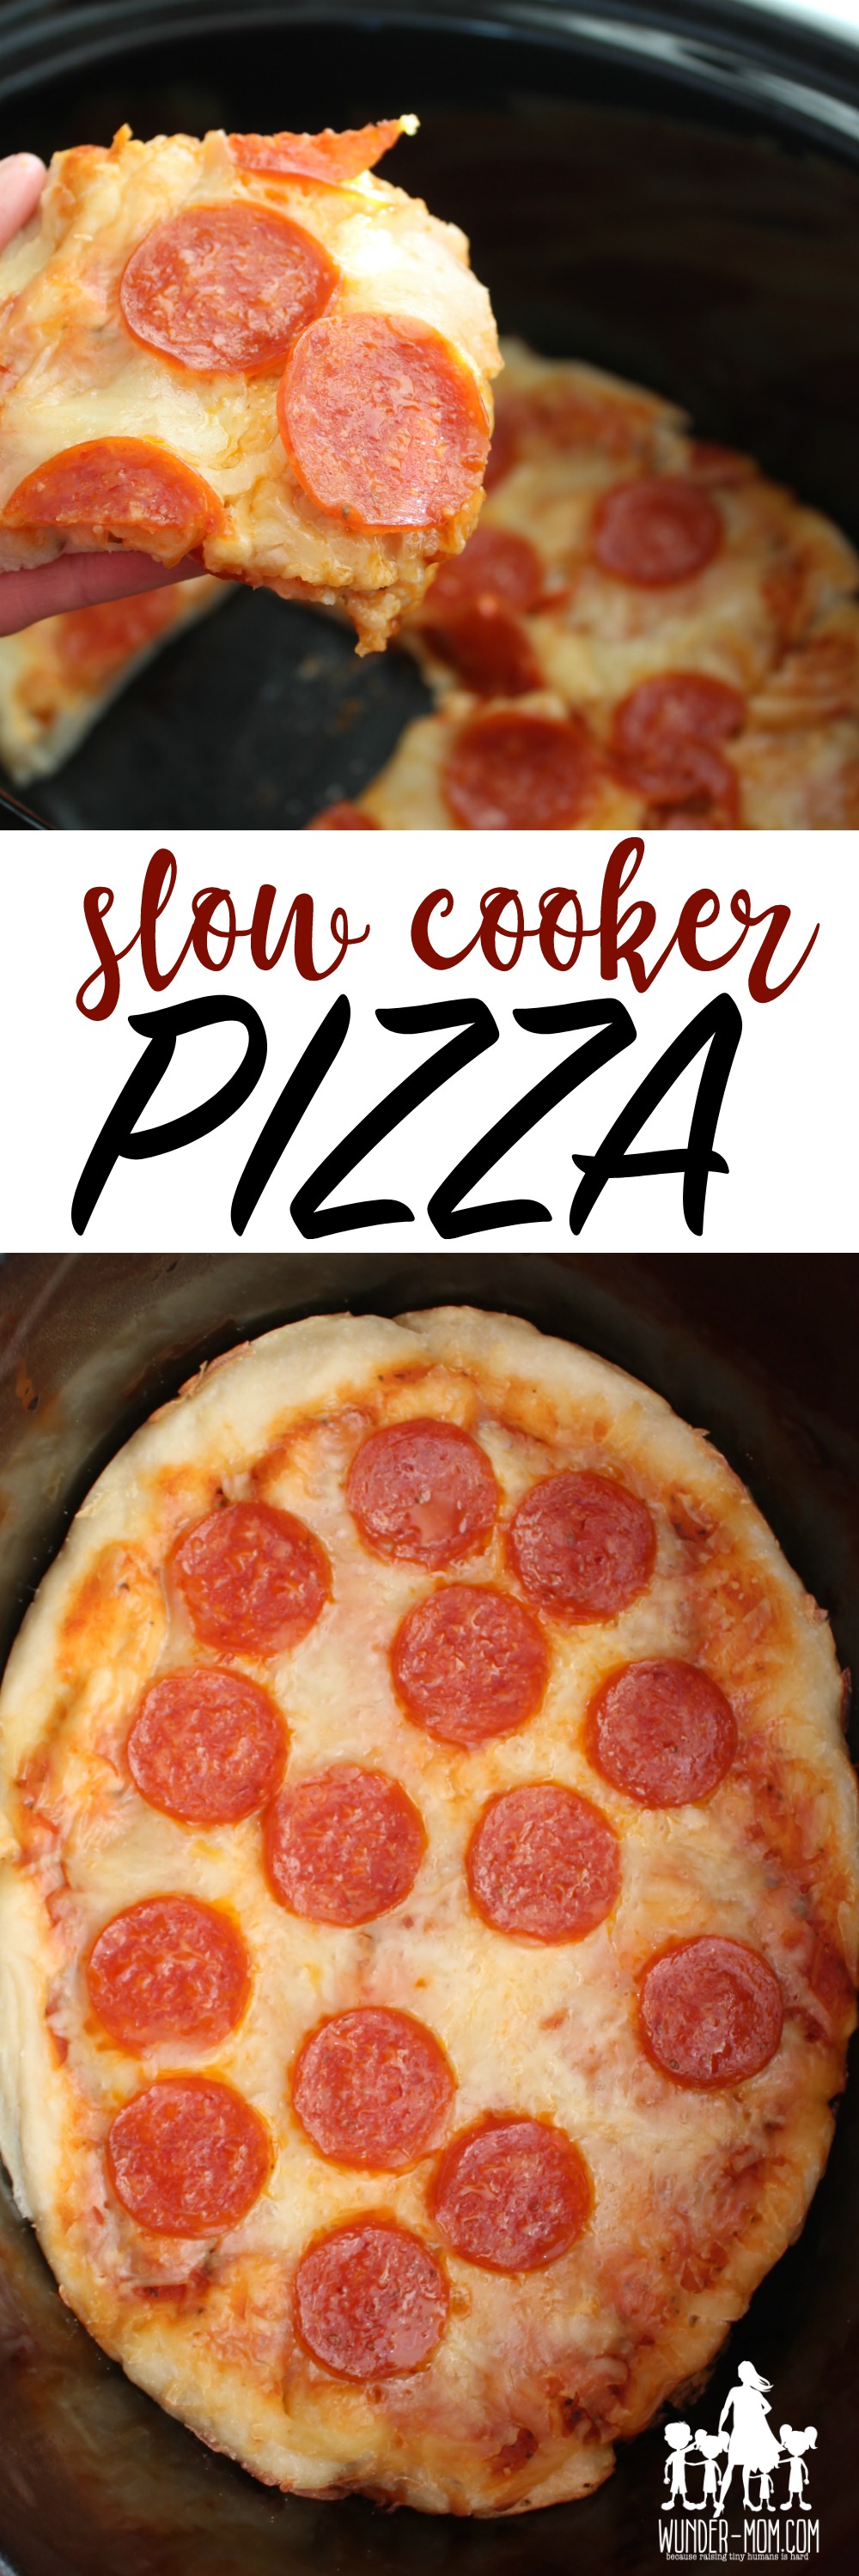 slow cooker pizza recipe